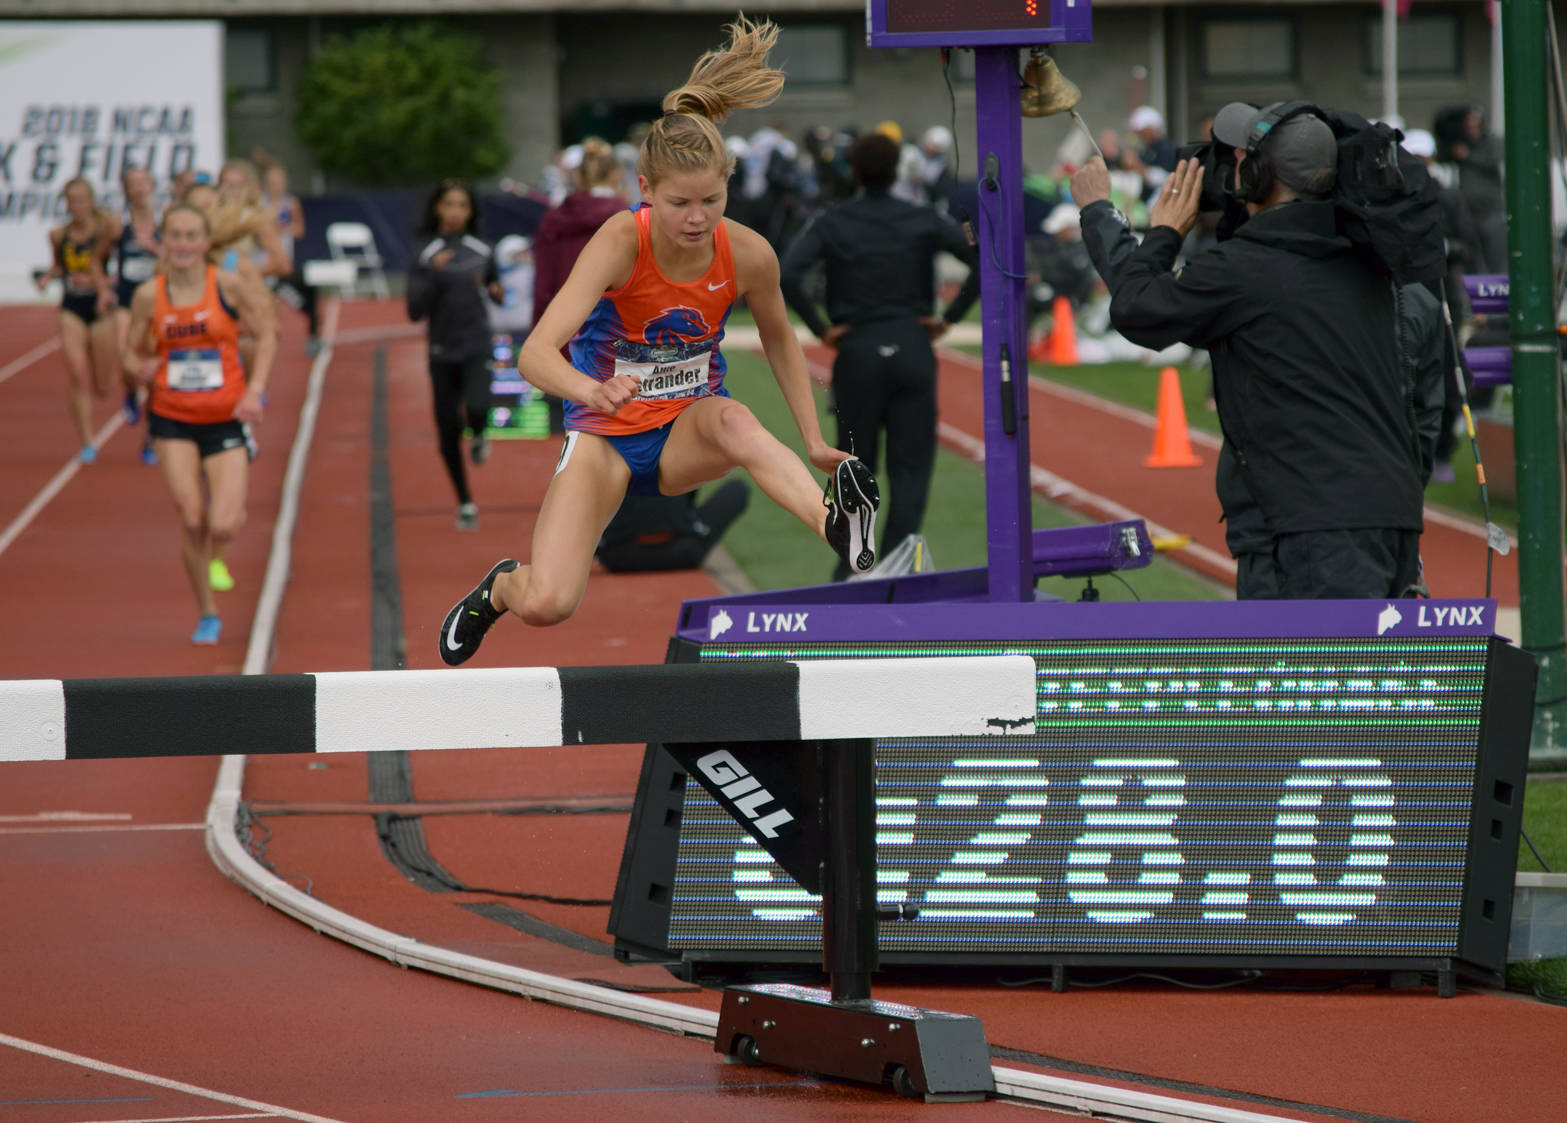 Boise State redshirt sophomore Allie Ostrander clears a hurdle en route to defending her 3,000-meter steeplechase title at the NCAA Outdoor Track and Field Championships in Eugene, Oregon, Saturday, May 9, 2018. (Photo provided by Boise State Athletics)